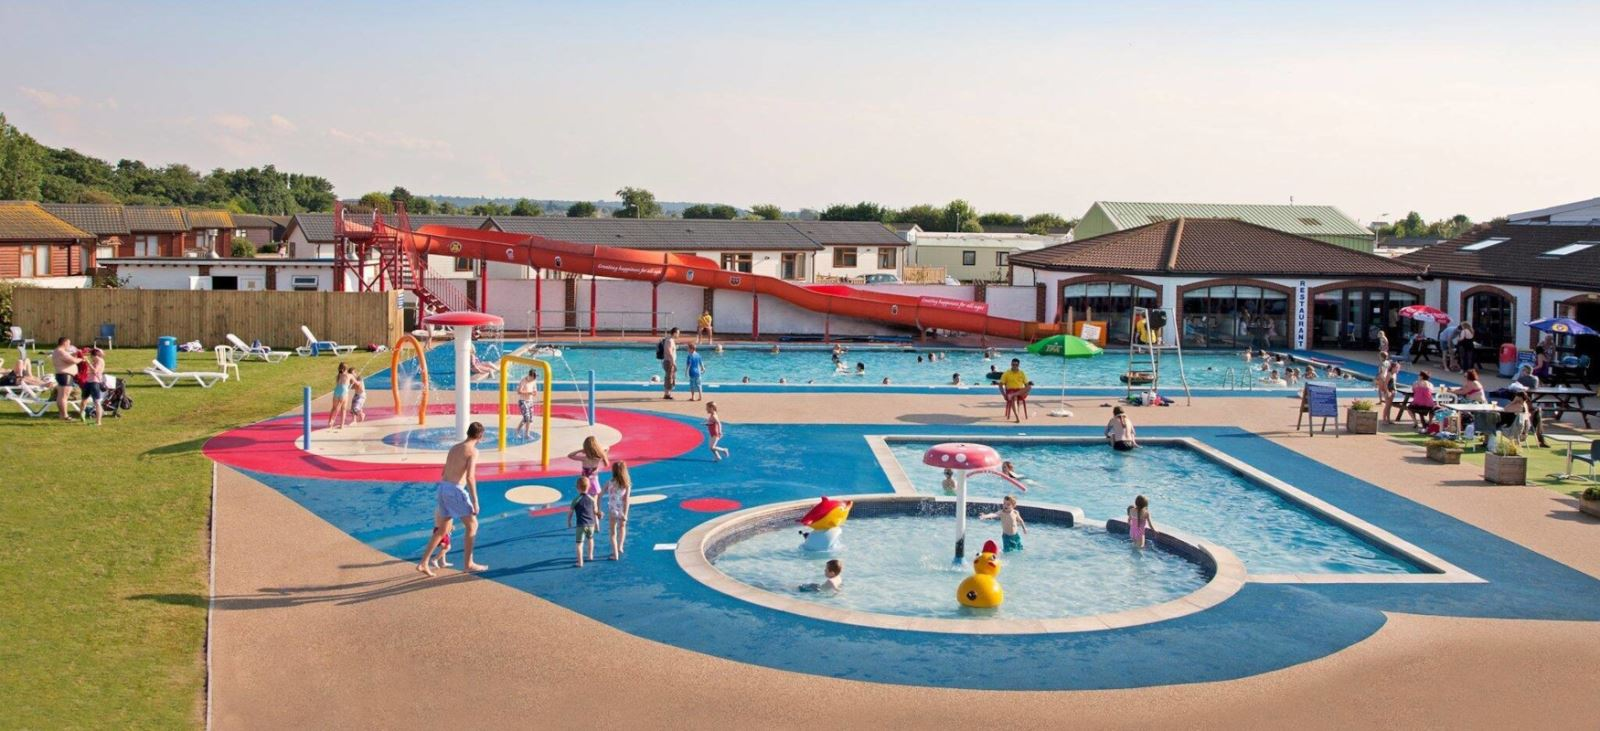 Visiting a holiday park in Norfolk is great for the families. With outside pools like seen in the photo, it's a family fun holiday